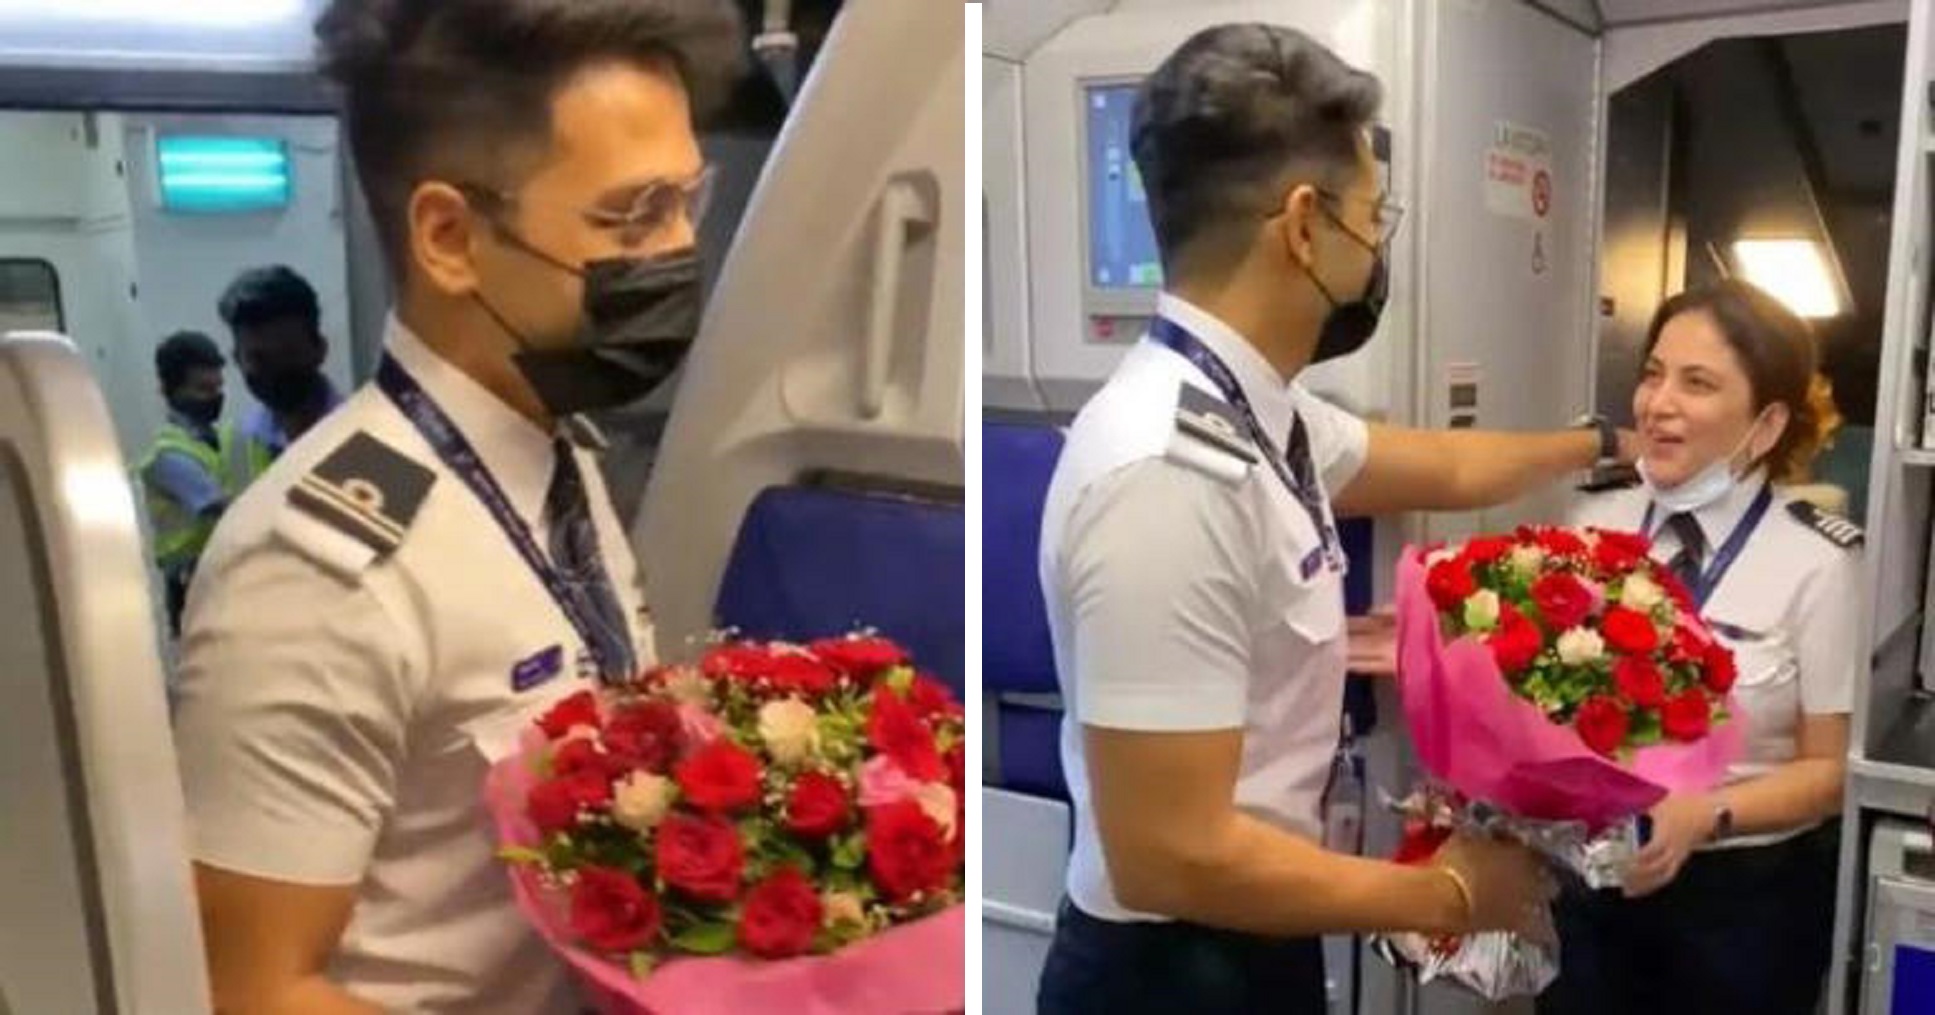 Pilot Pays Tribute To His Co-Worker Mother, Posted In The Same Flight, On The Occasion Of Mother’s Day